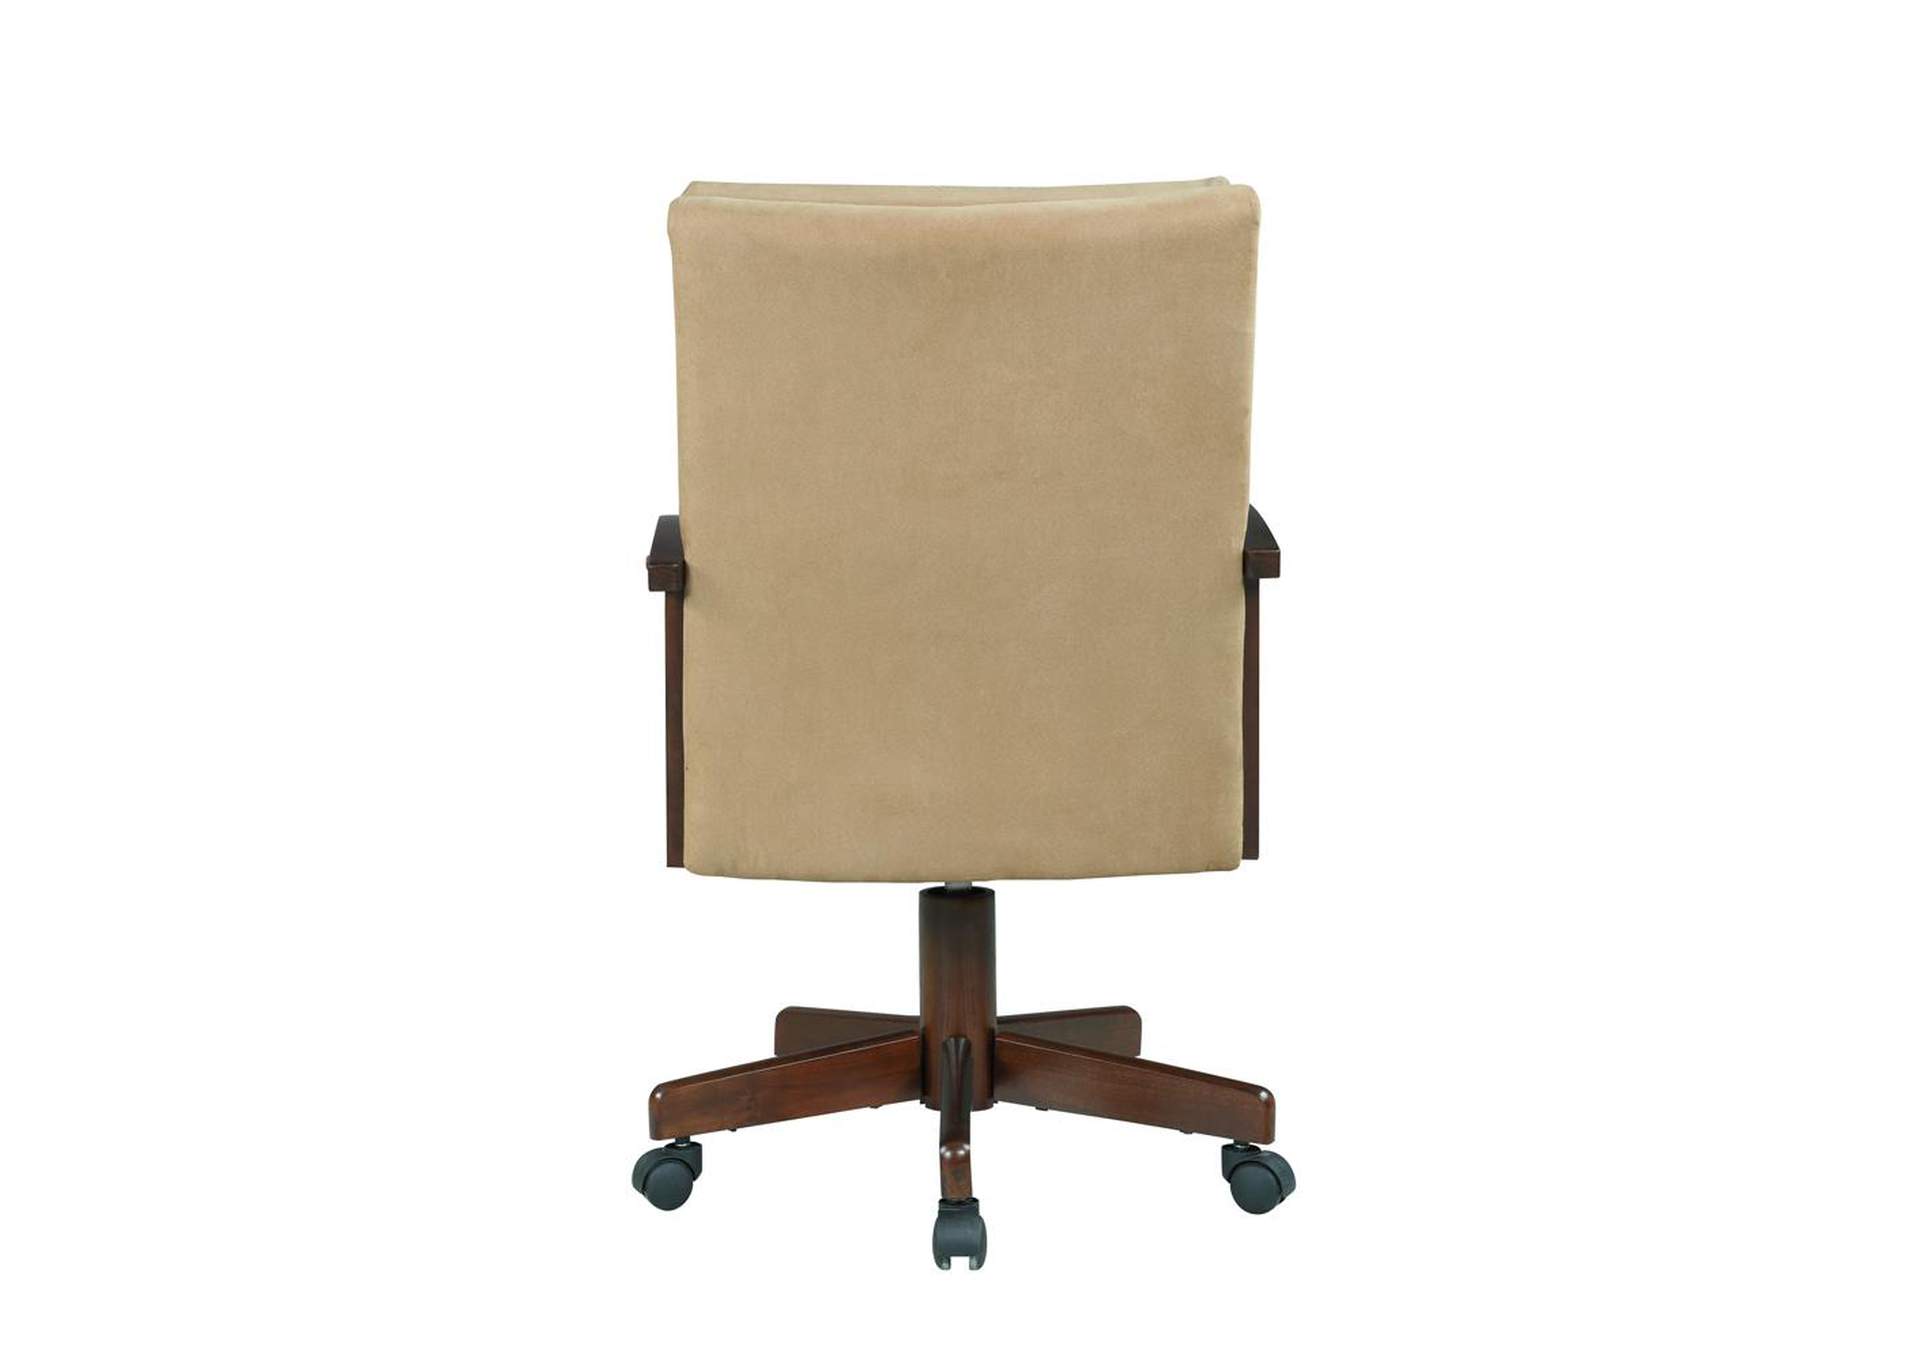 Marietta Upholstered Game Chair Tobacco and Tan,Coaster Furniture